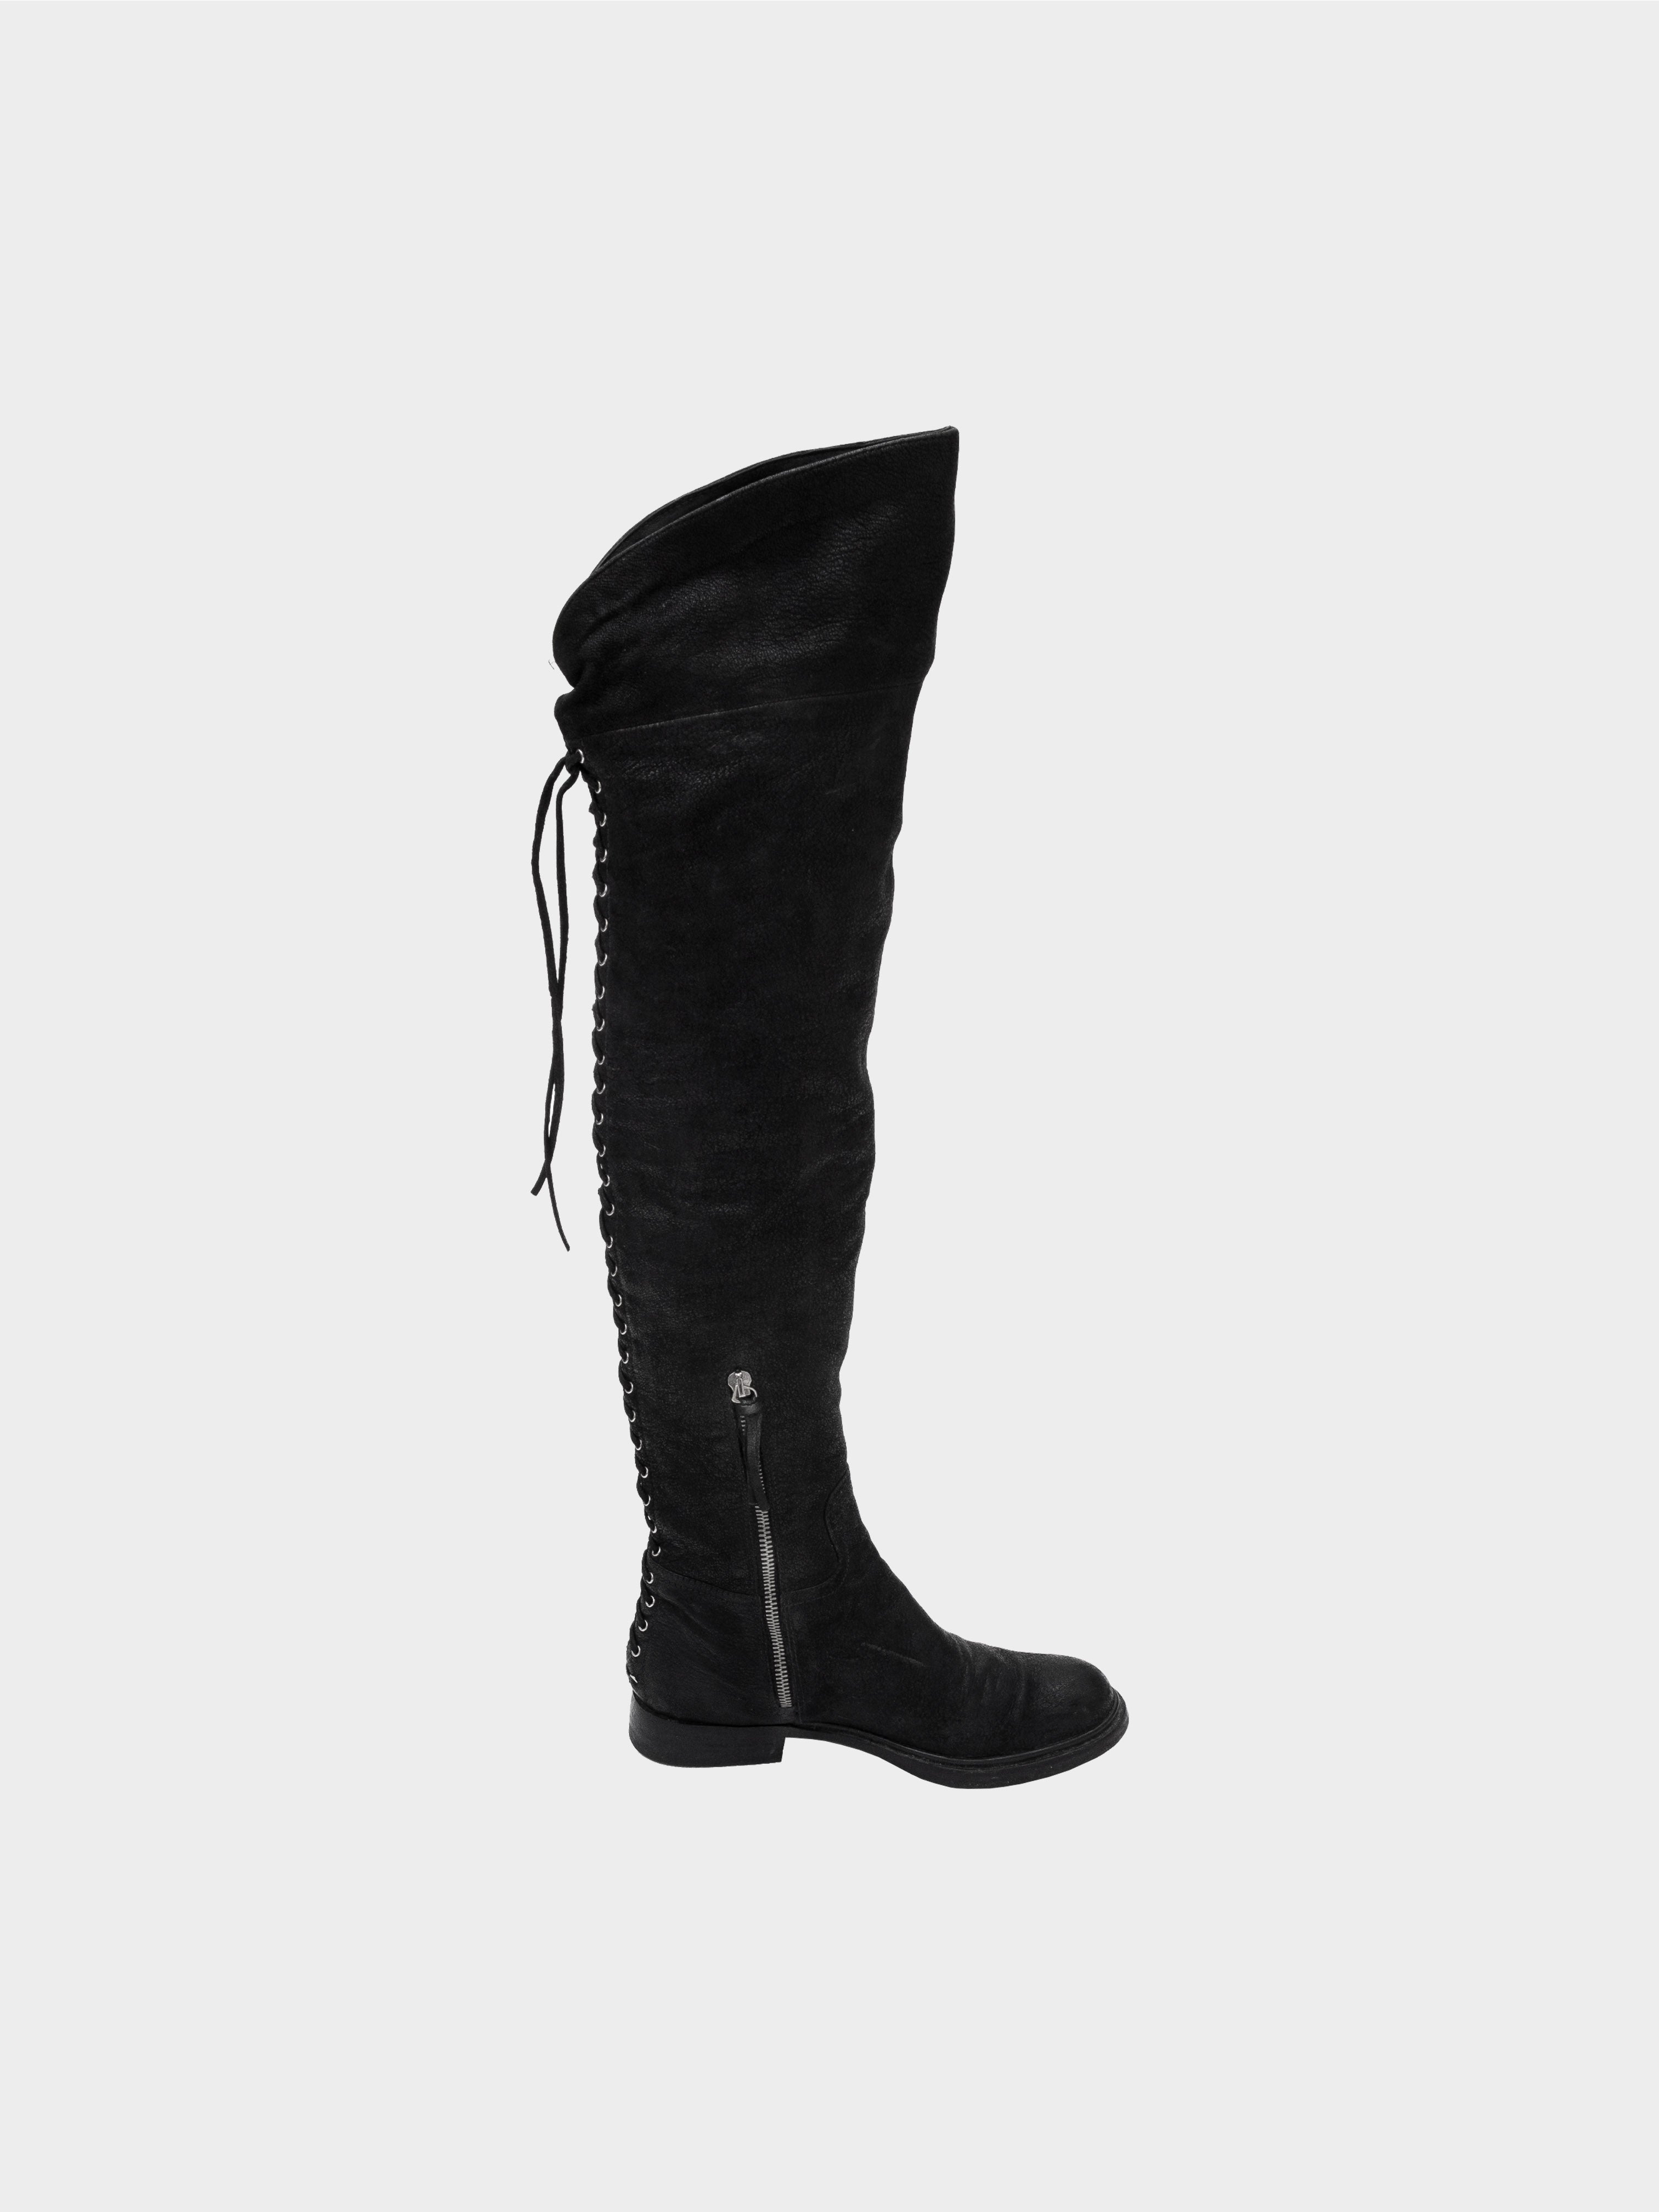 Miu Miu Early 2000s Overknee Lace-Up Leather Boots